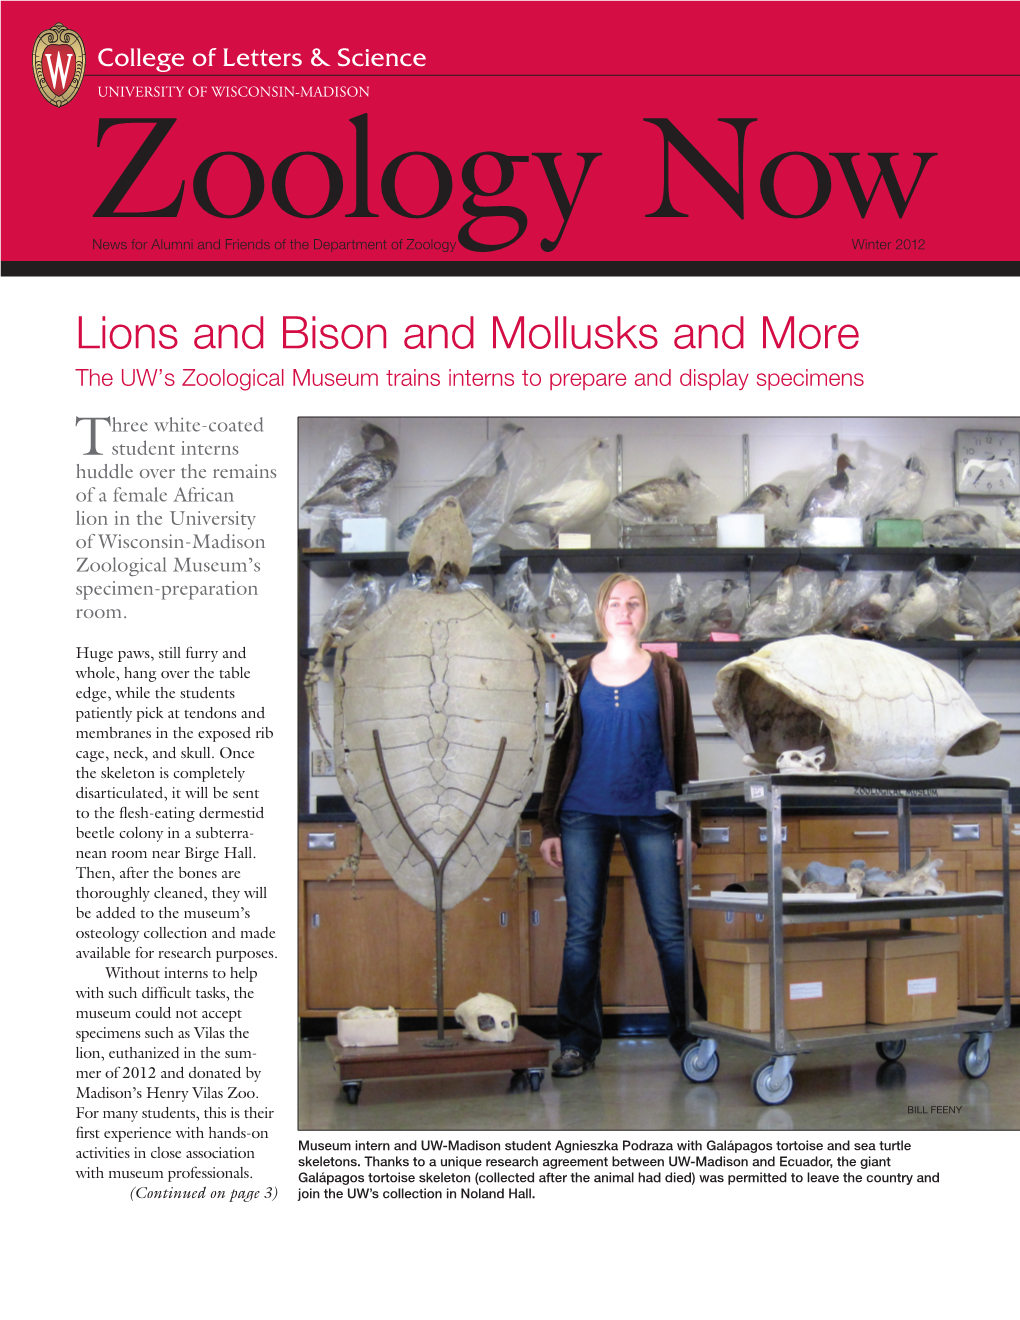 Lions and Bison and Mollusks and More the UW’S Zoological Museum Trains Interns to Prepare and Display Specimens